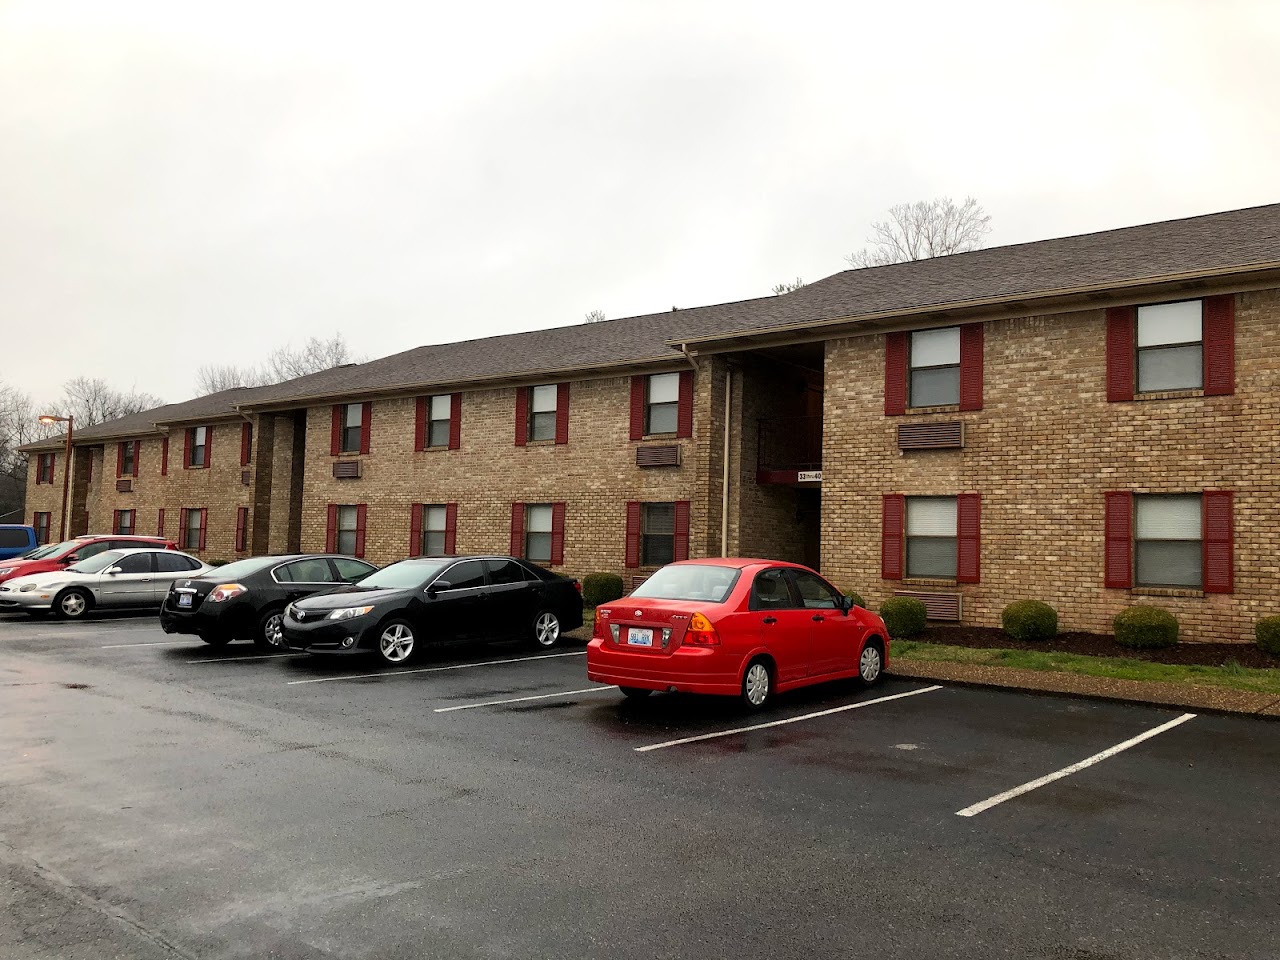 Photo of QUAD COUNTY HOUSING, LLC at FT. CAMPBELL BLVD HOPKINSVILLE, KY 42240